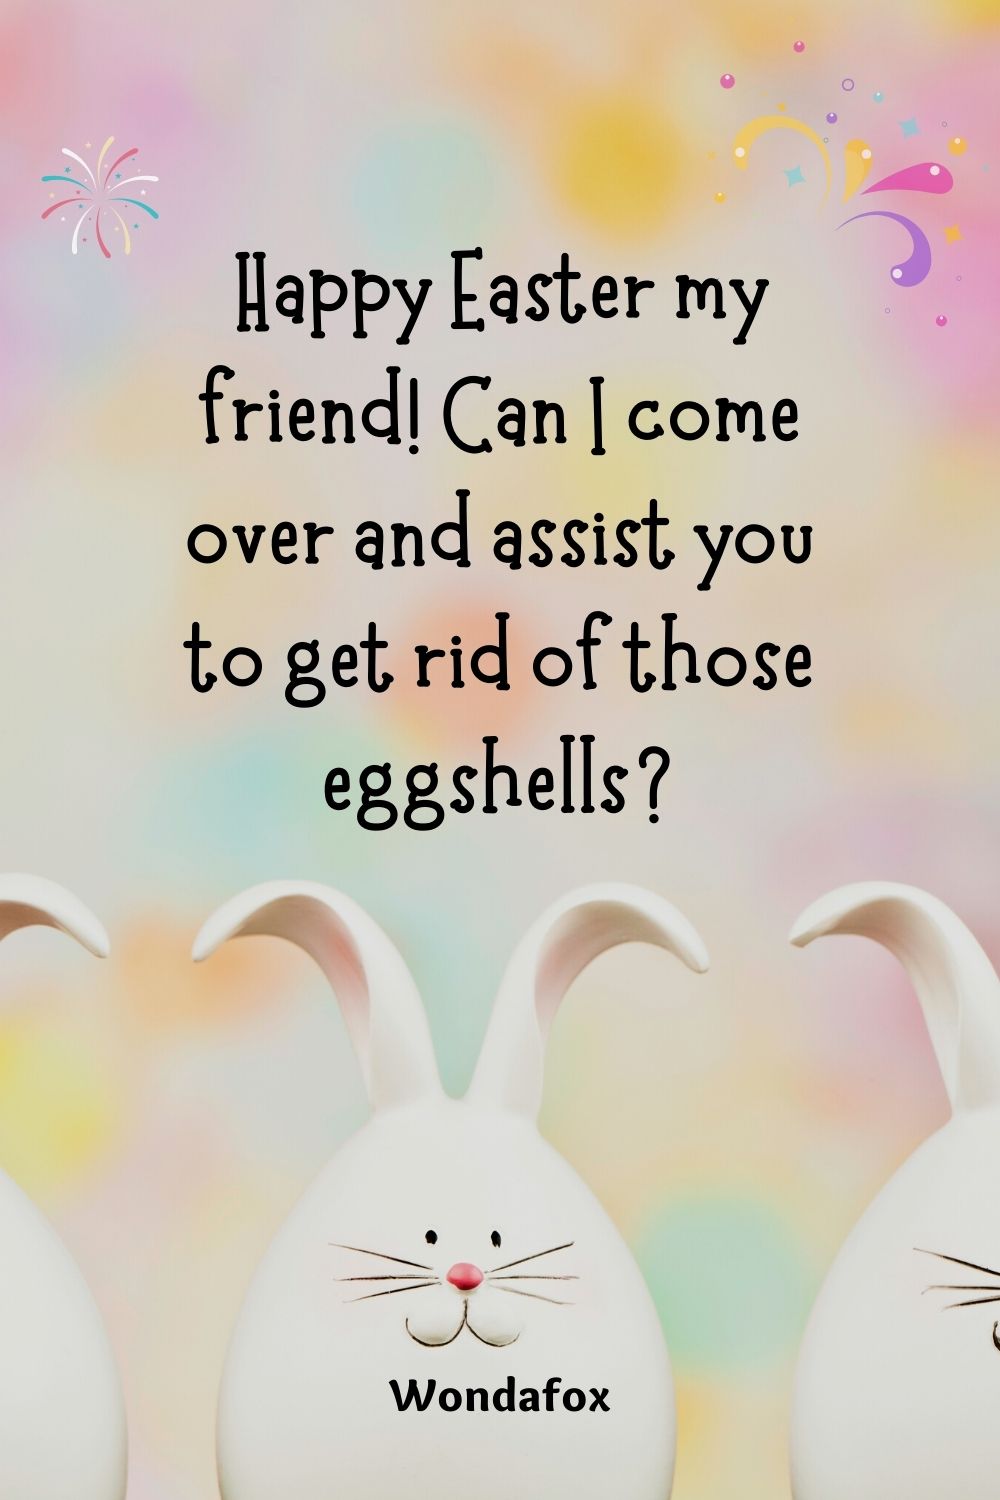 Happy Easter my friend! Can I come over and assist you to get rid of those eggshells?